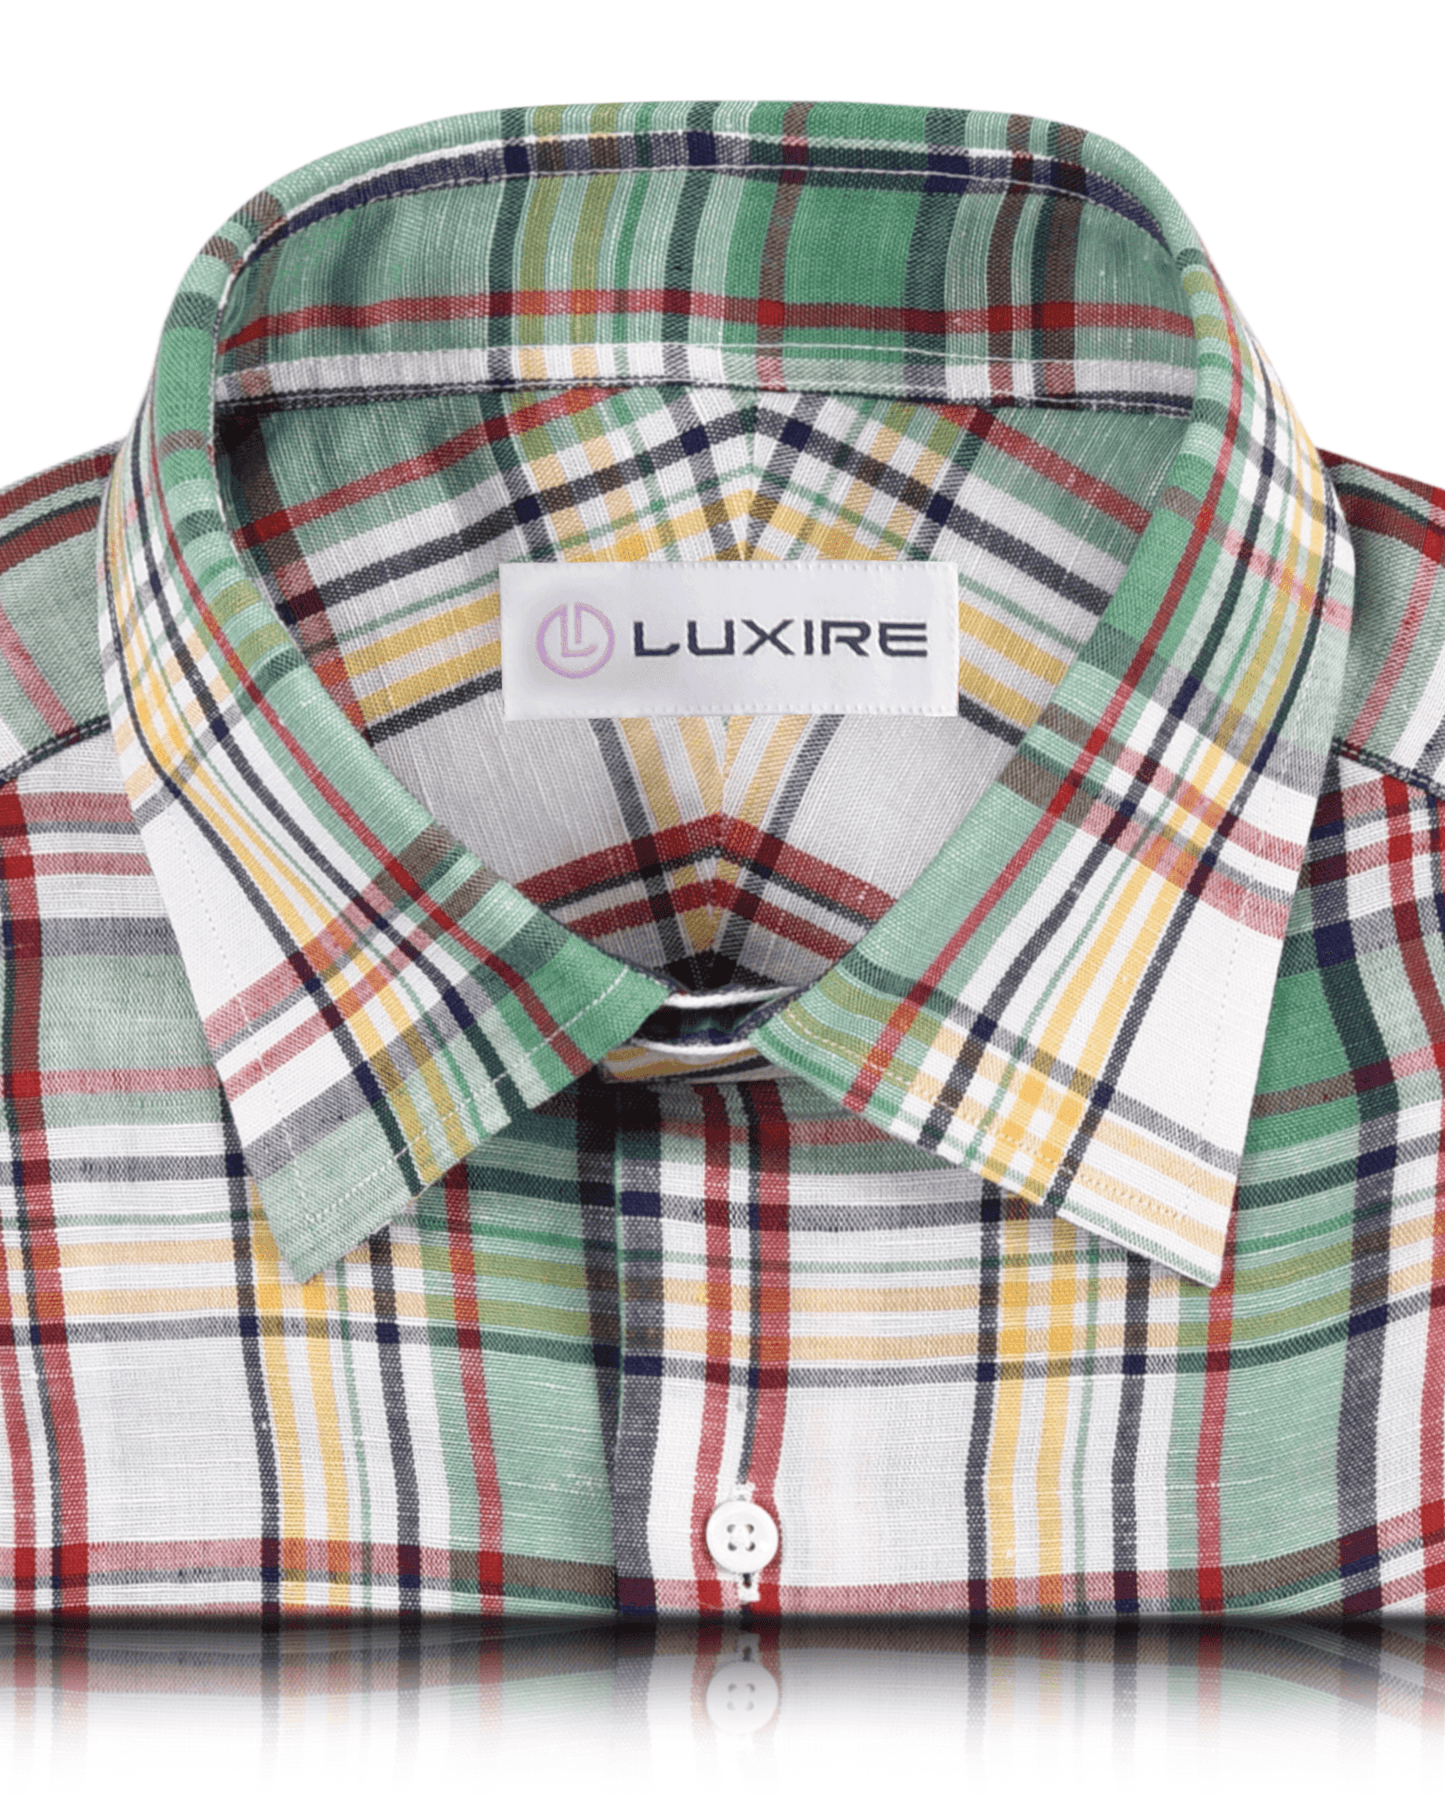 Collar of the custom linen shirt for men in multi-coloured checks by Luxire Clothing